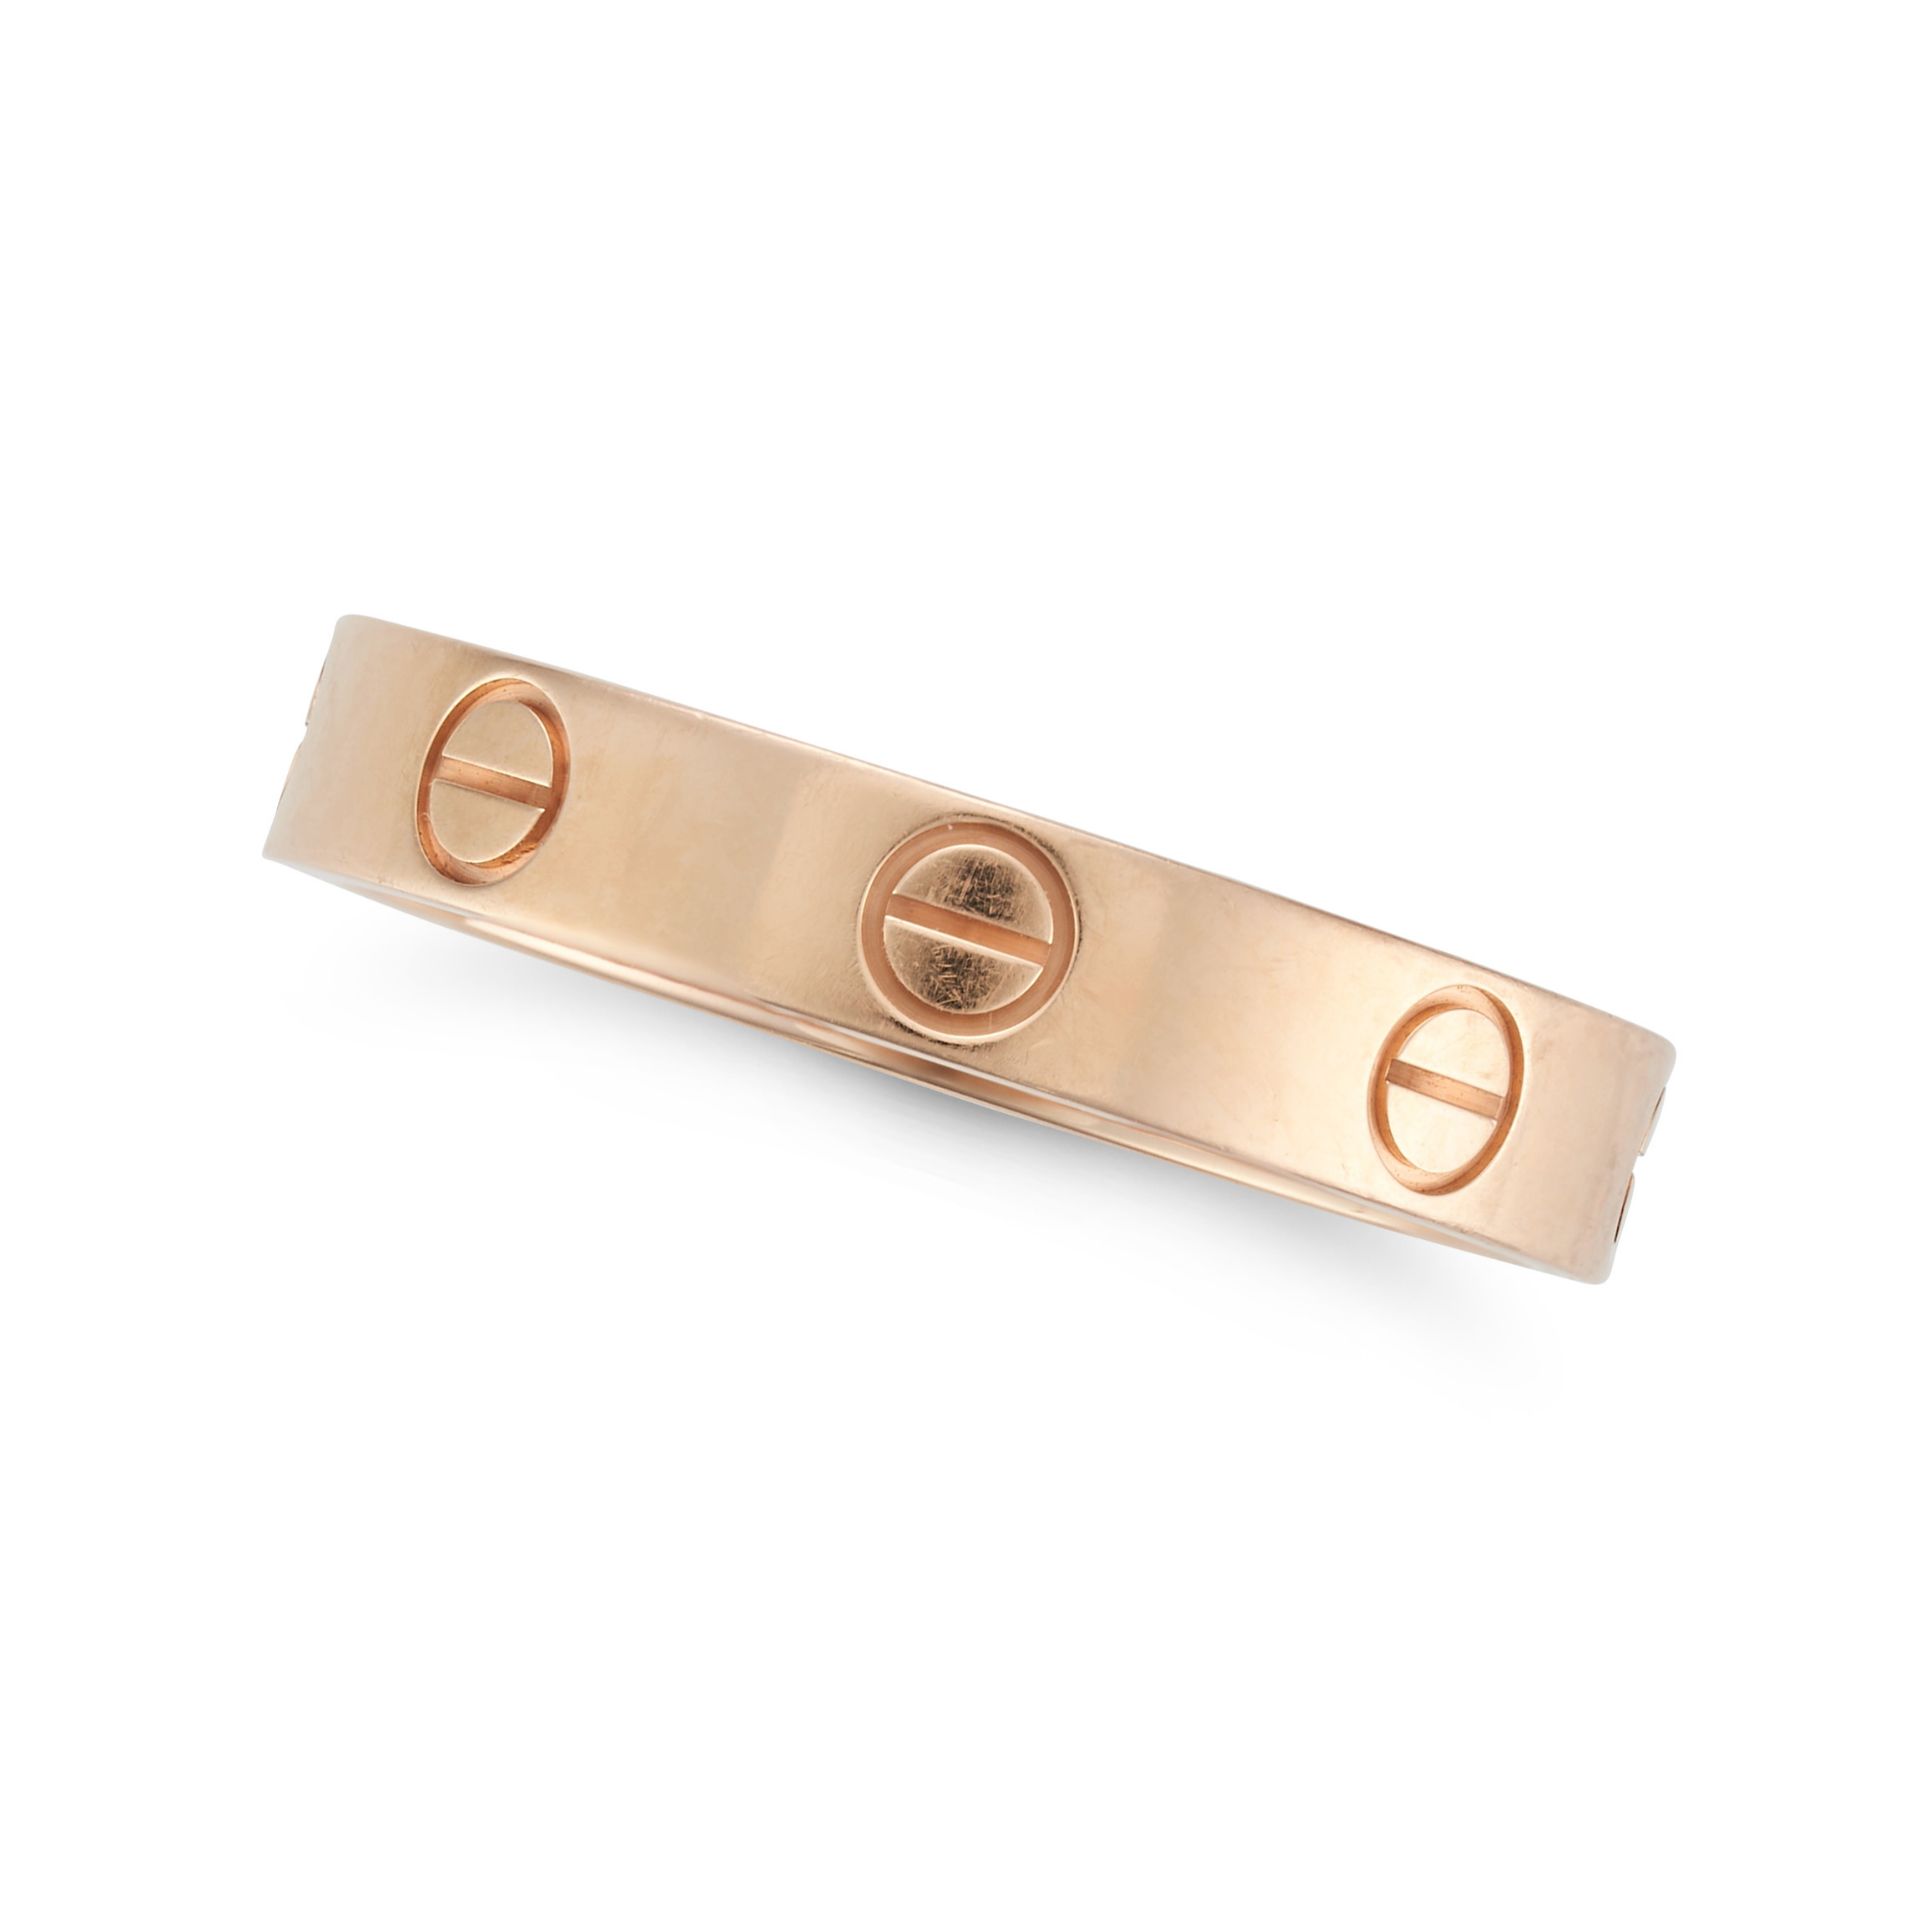 CARTIER, A LOVE RING in 18ct rose gold, the band punctuated by screw head motifs, signed Cartier ...